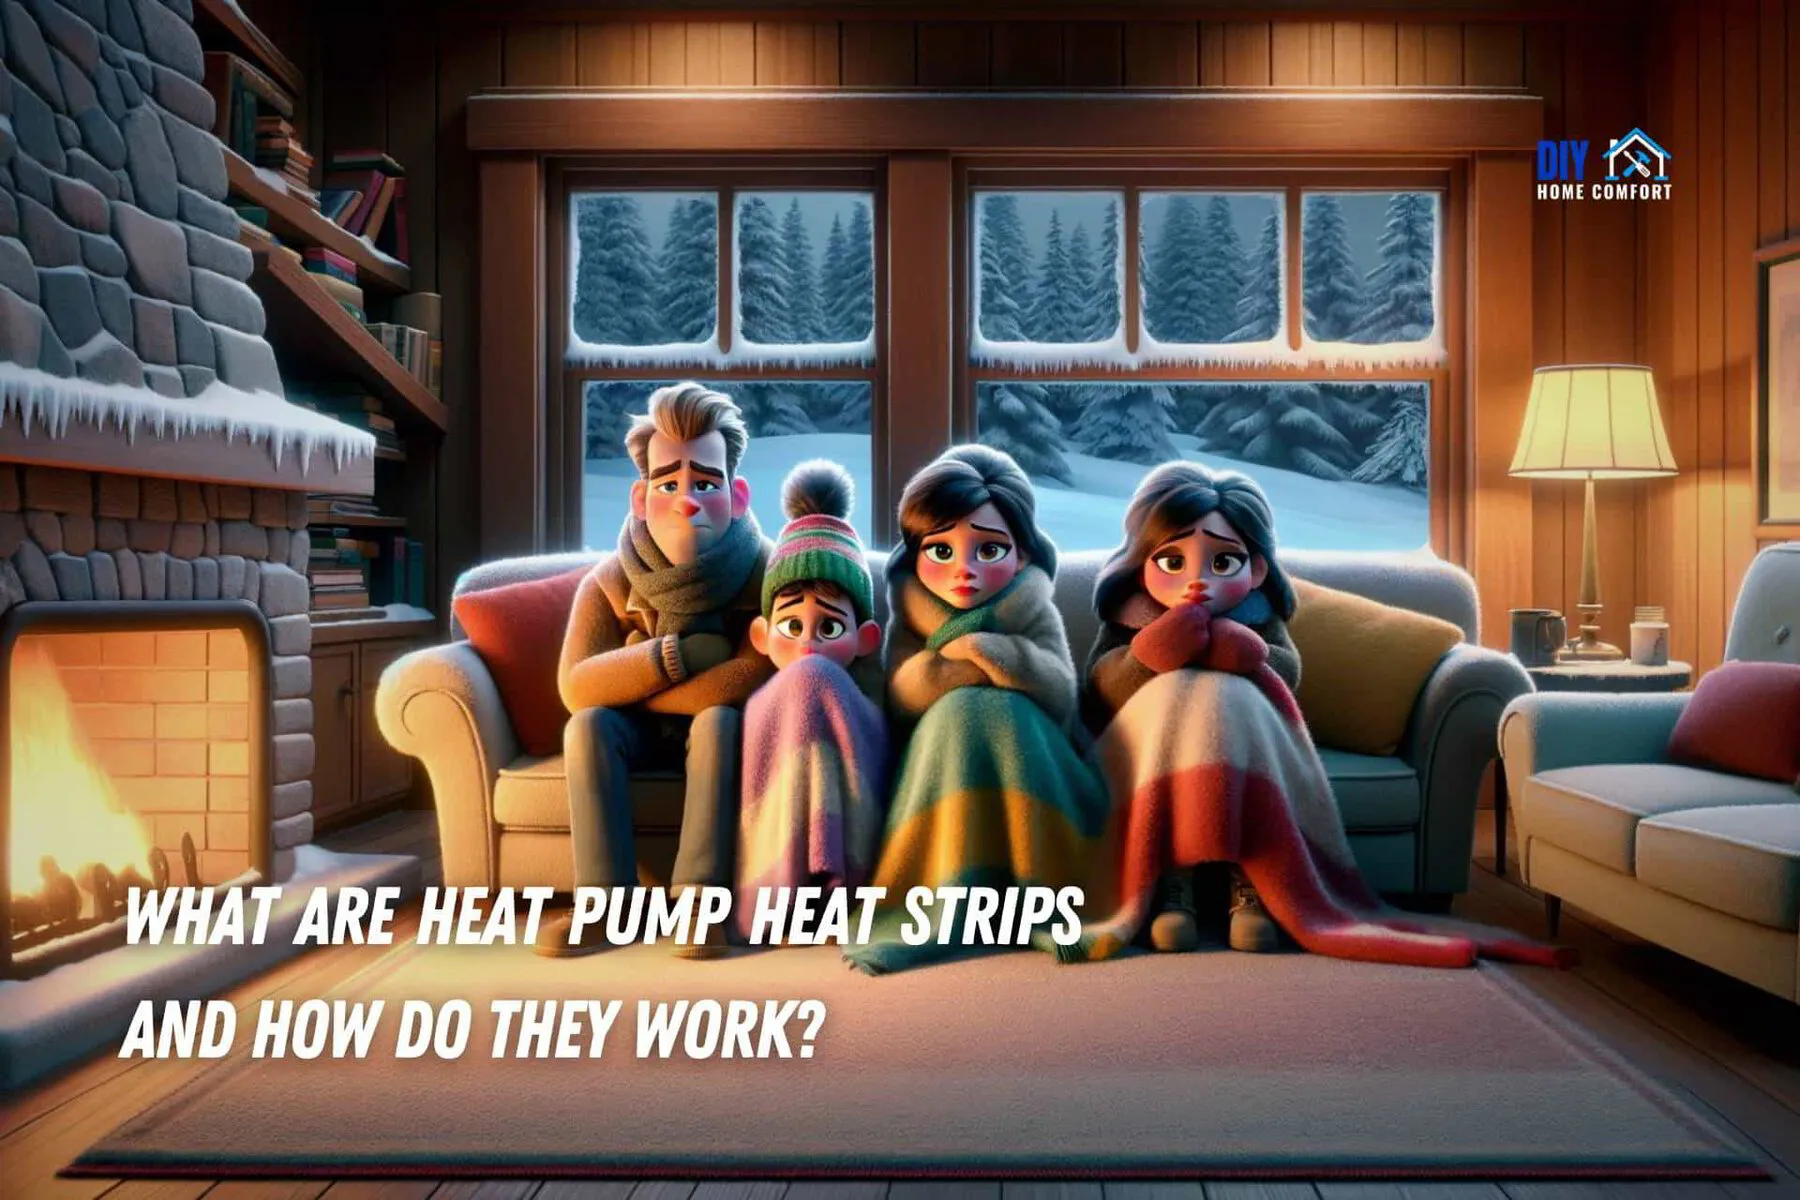 What Are Heat Pump Heat Strips and How Do They Work? | DIY Home Comfort